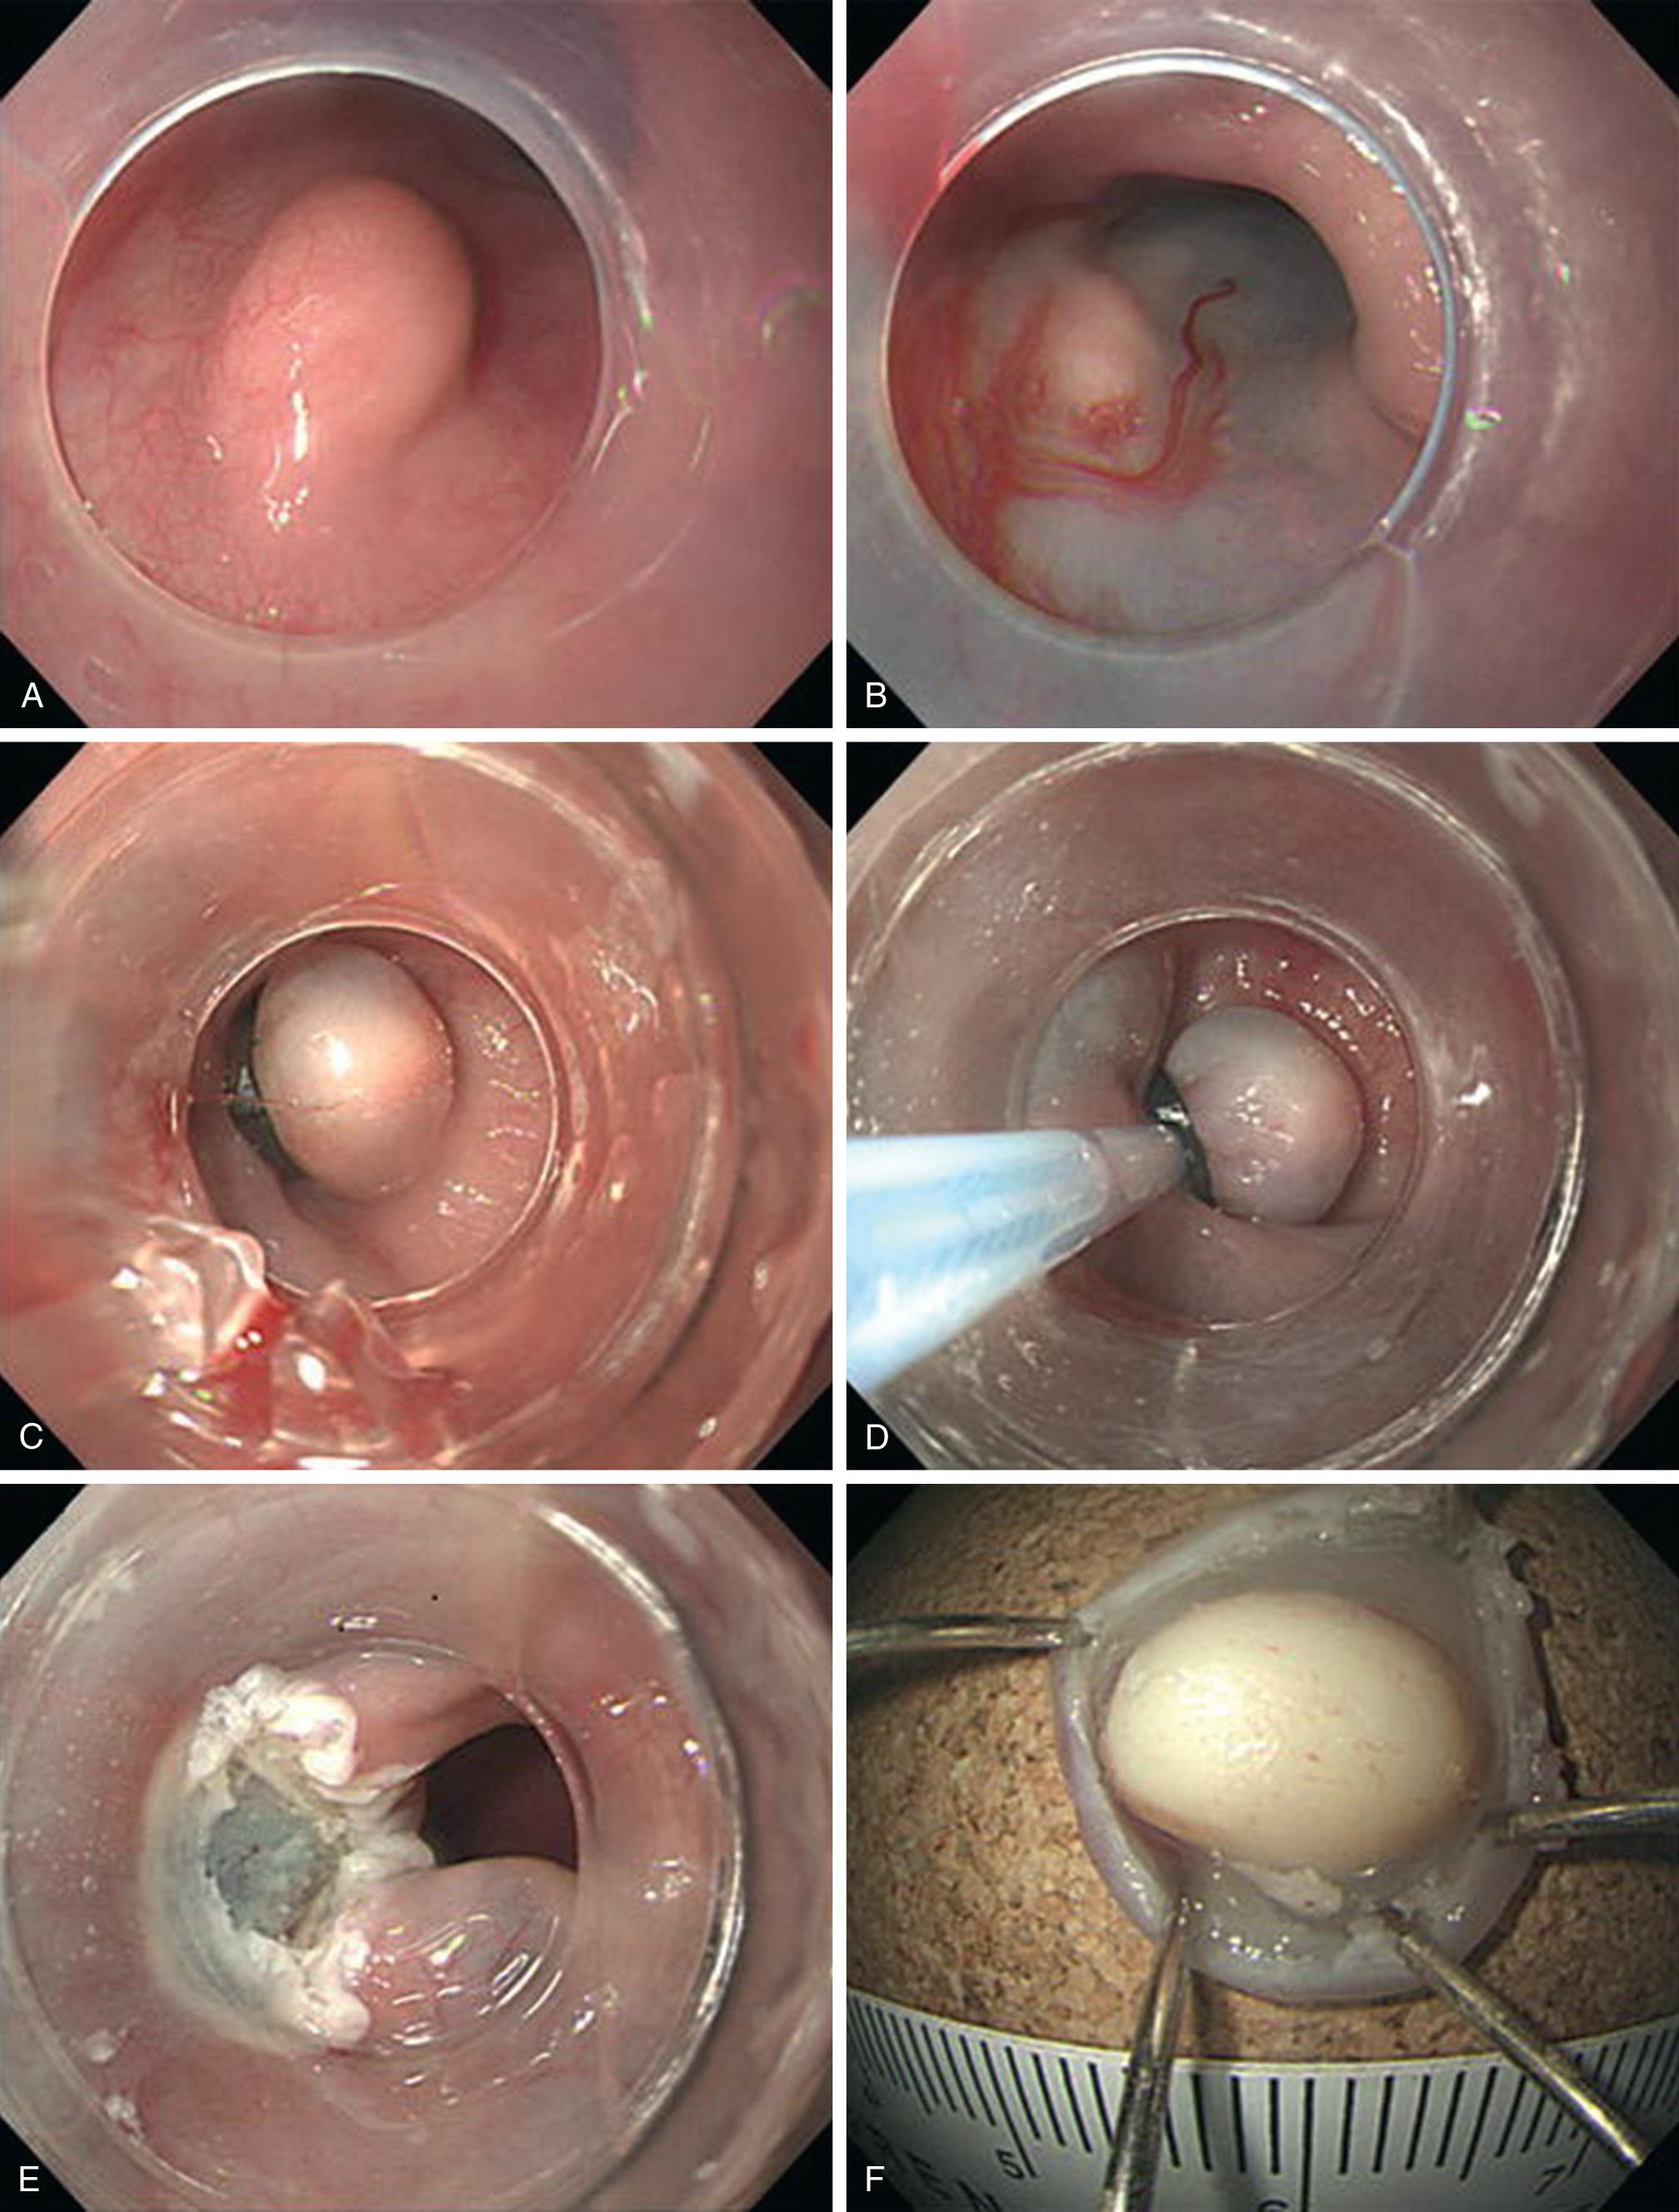 FIGURE 46.4, Endoscopic mucosal resection of a submucosal tumor (SMT) using a ligation device in the esophagus. (A) An SMT is observed in the lower esophagus. (B) Saline solution with a small amount of epinephrine and indigo carmine dye is injected beneath the lesion to elevate it. (C) The lesion is then aspirated into the ligation device, followed by deployment of the elastic band. (D) Snare resection is performed using a blended electrosurgical current. (E) The lesion is completely removed. (F) Inner surface of the resected specimen.